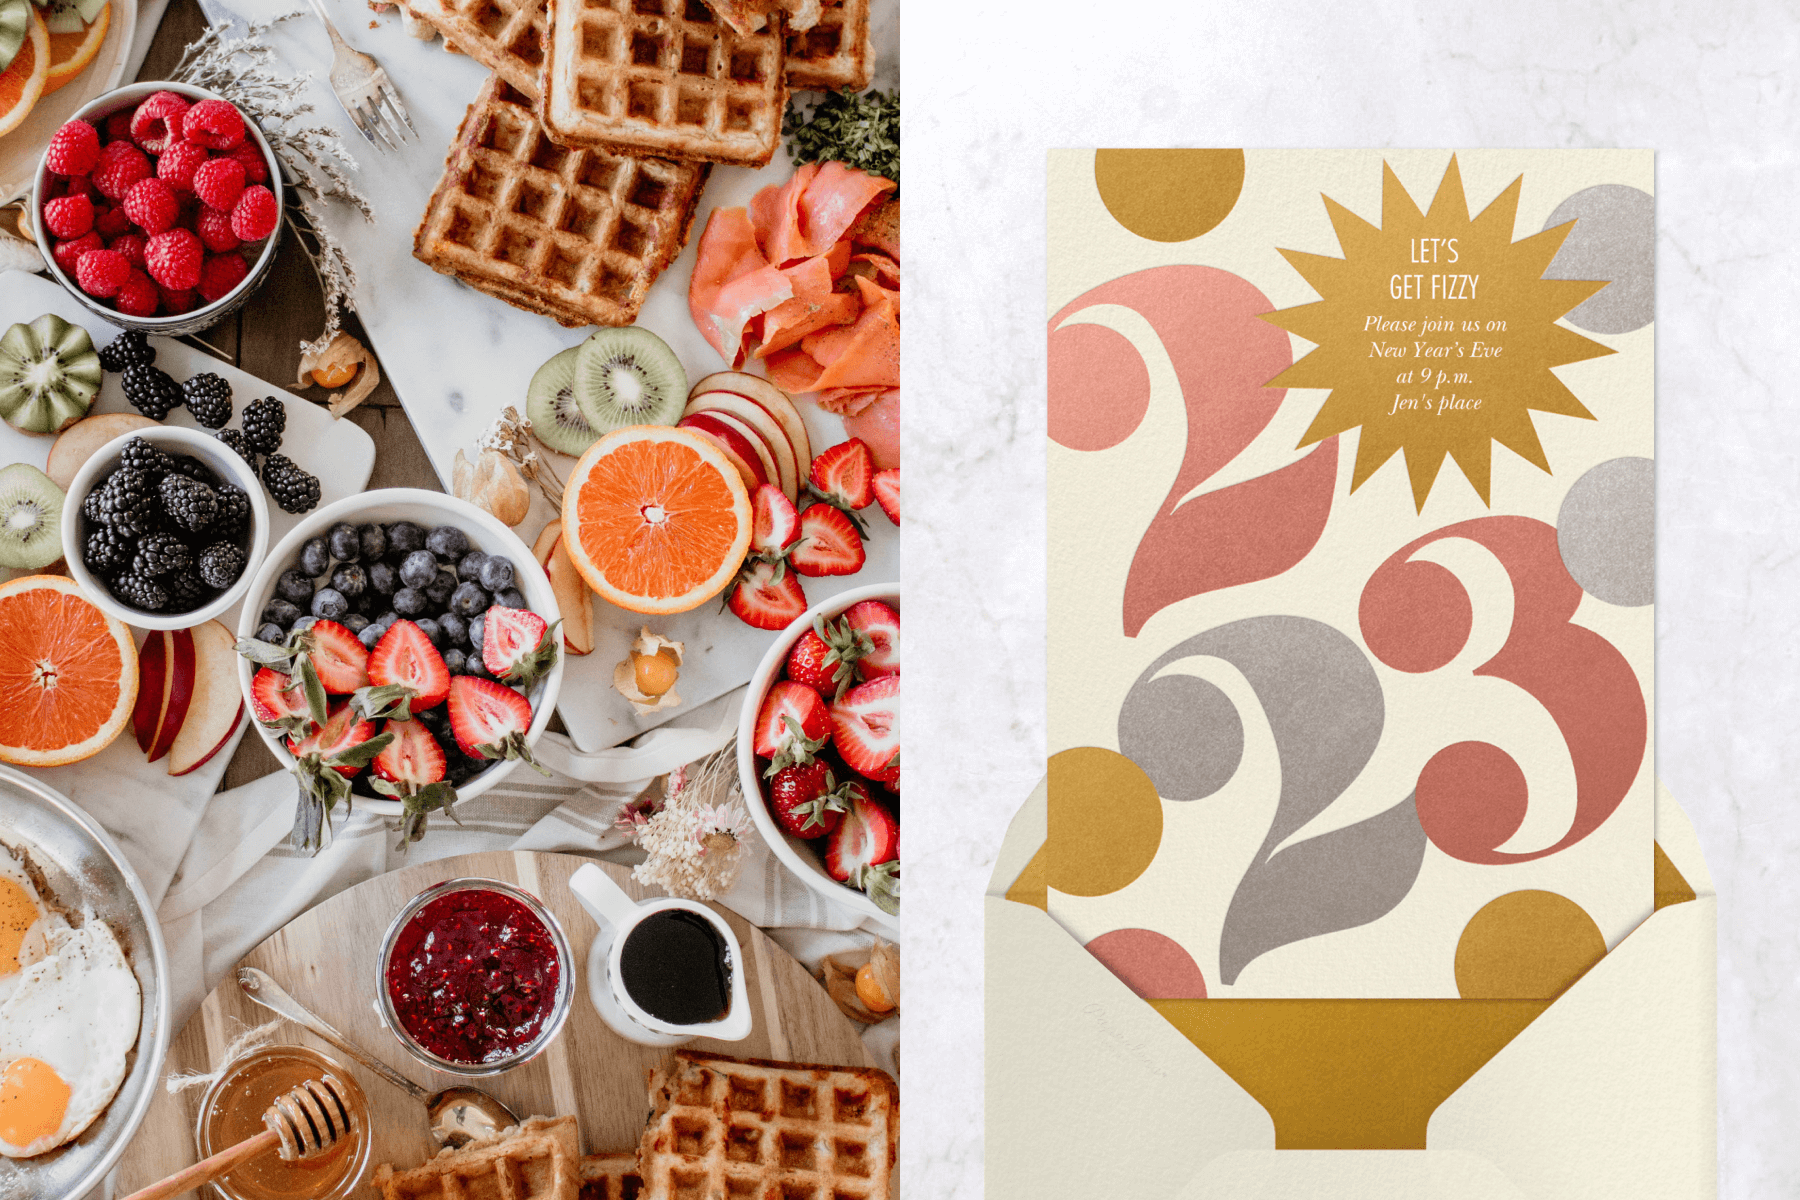 left: A crowded table spread of breakfast foods including bowls of berries, sliced fruits, square waffles, and syrups. Right: A New Year’s Eve party invitation with the oversized numbers “2023” in pink, silver, and gold and confetti circles.